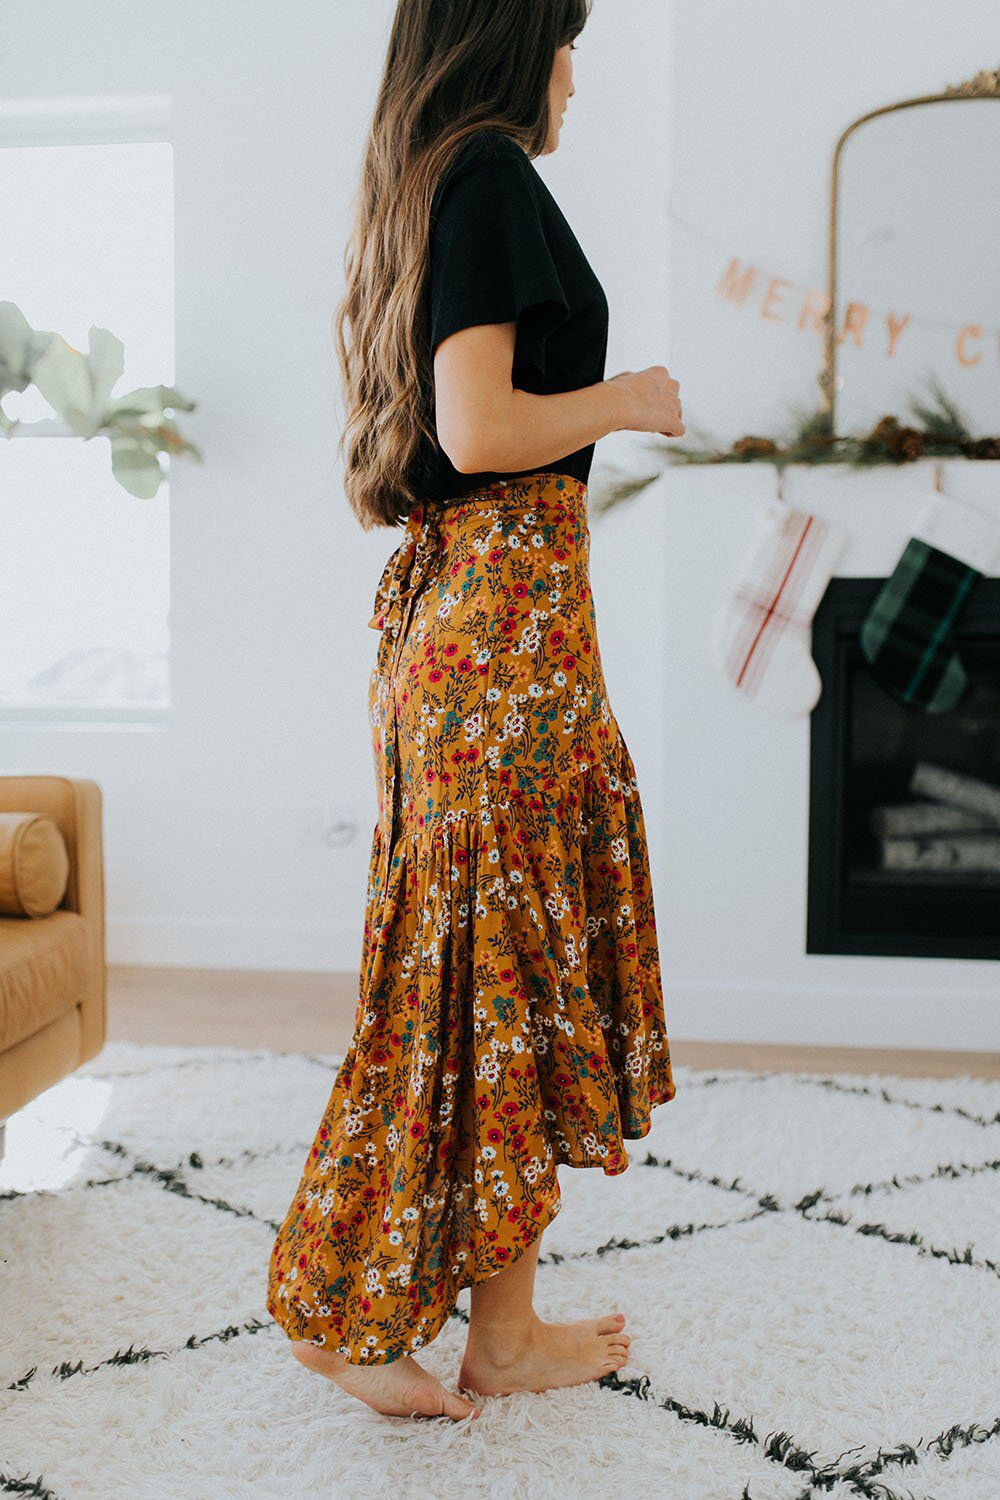 Outfit Ideas For Church, Casual wear, Floral Skirt | Outfit Ideas For ...